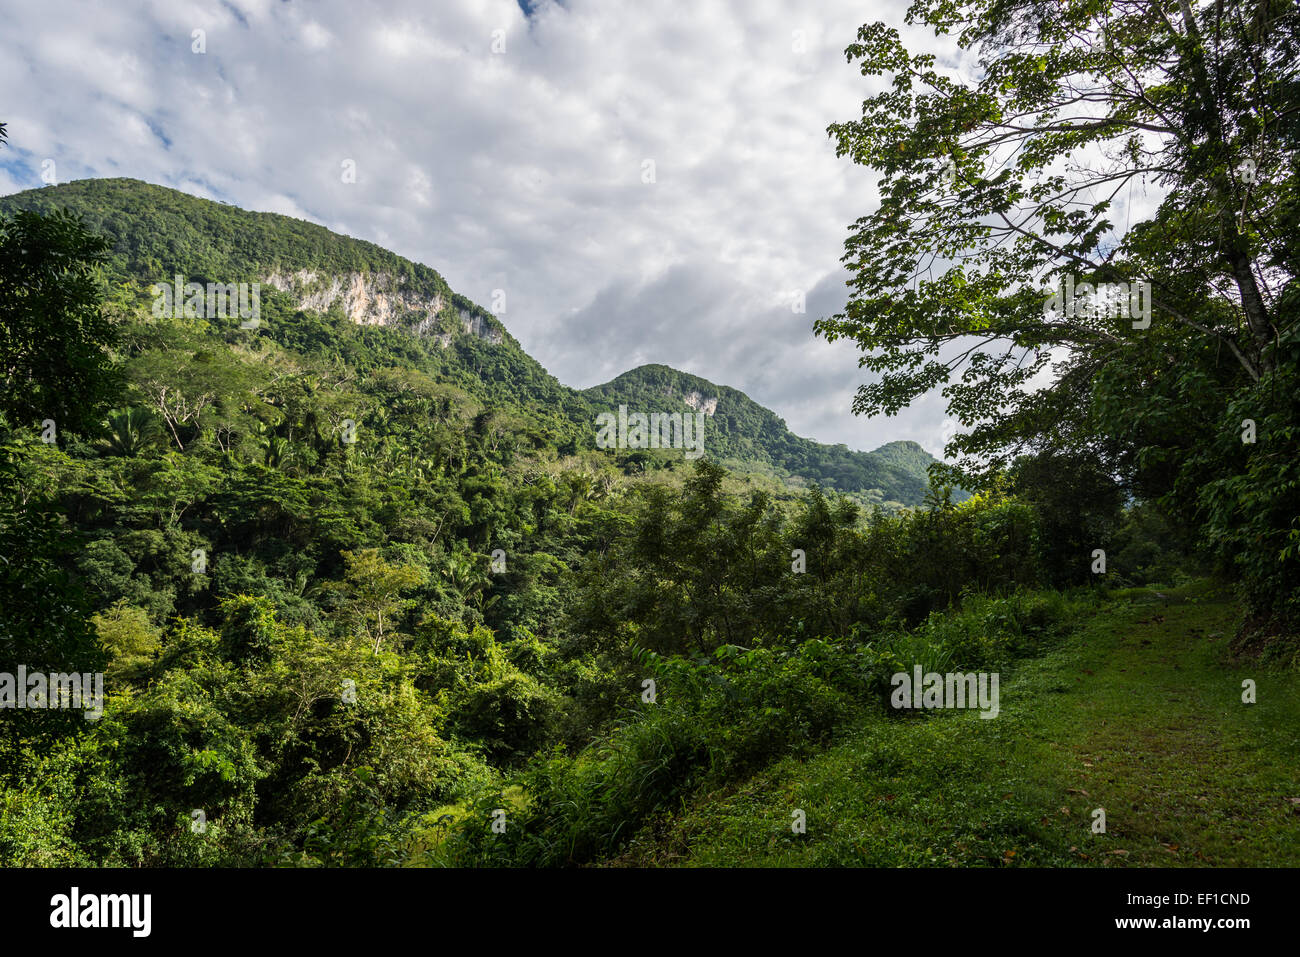 A trail through lush green jungles of Belize, Central America. Stock Photo